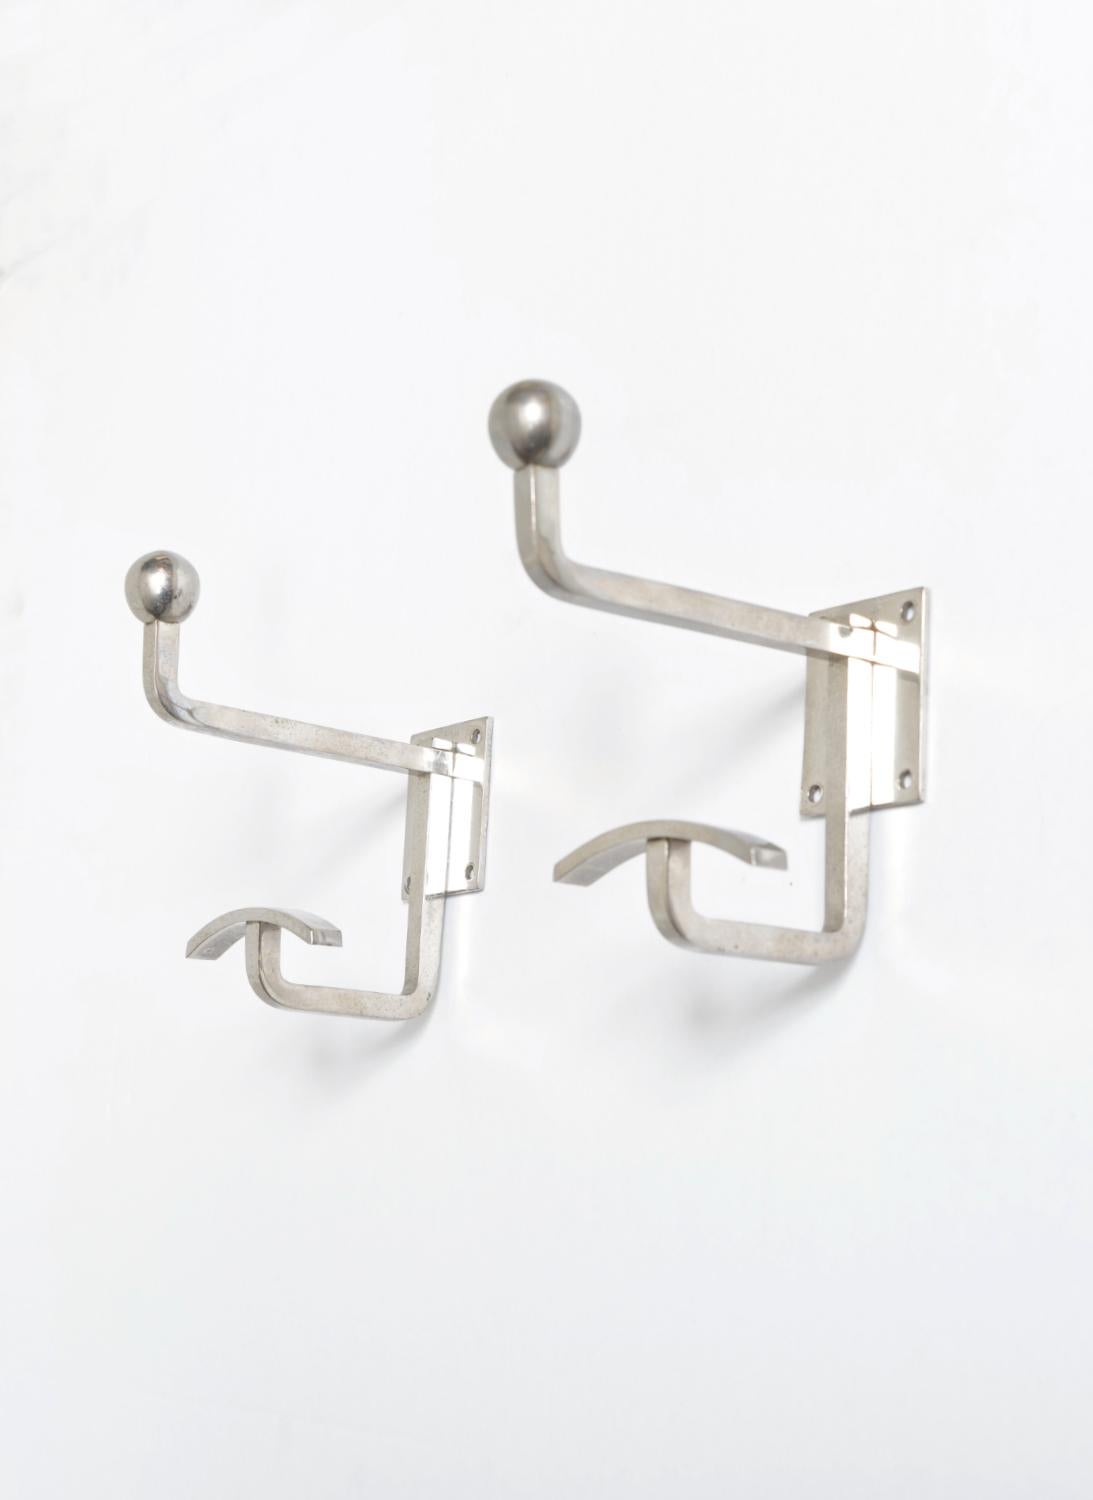 This rare pair of Mid-Century nickel-plated coat hooks by avant-garde French designer Jean Royère are incredibly stylish and functional. Born in Paris, Jean Royère (1902-1981) made an international reputation as designer of luxury interiors in